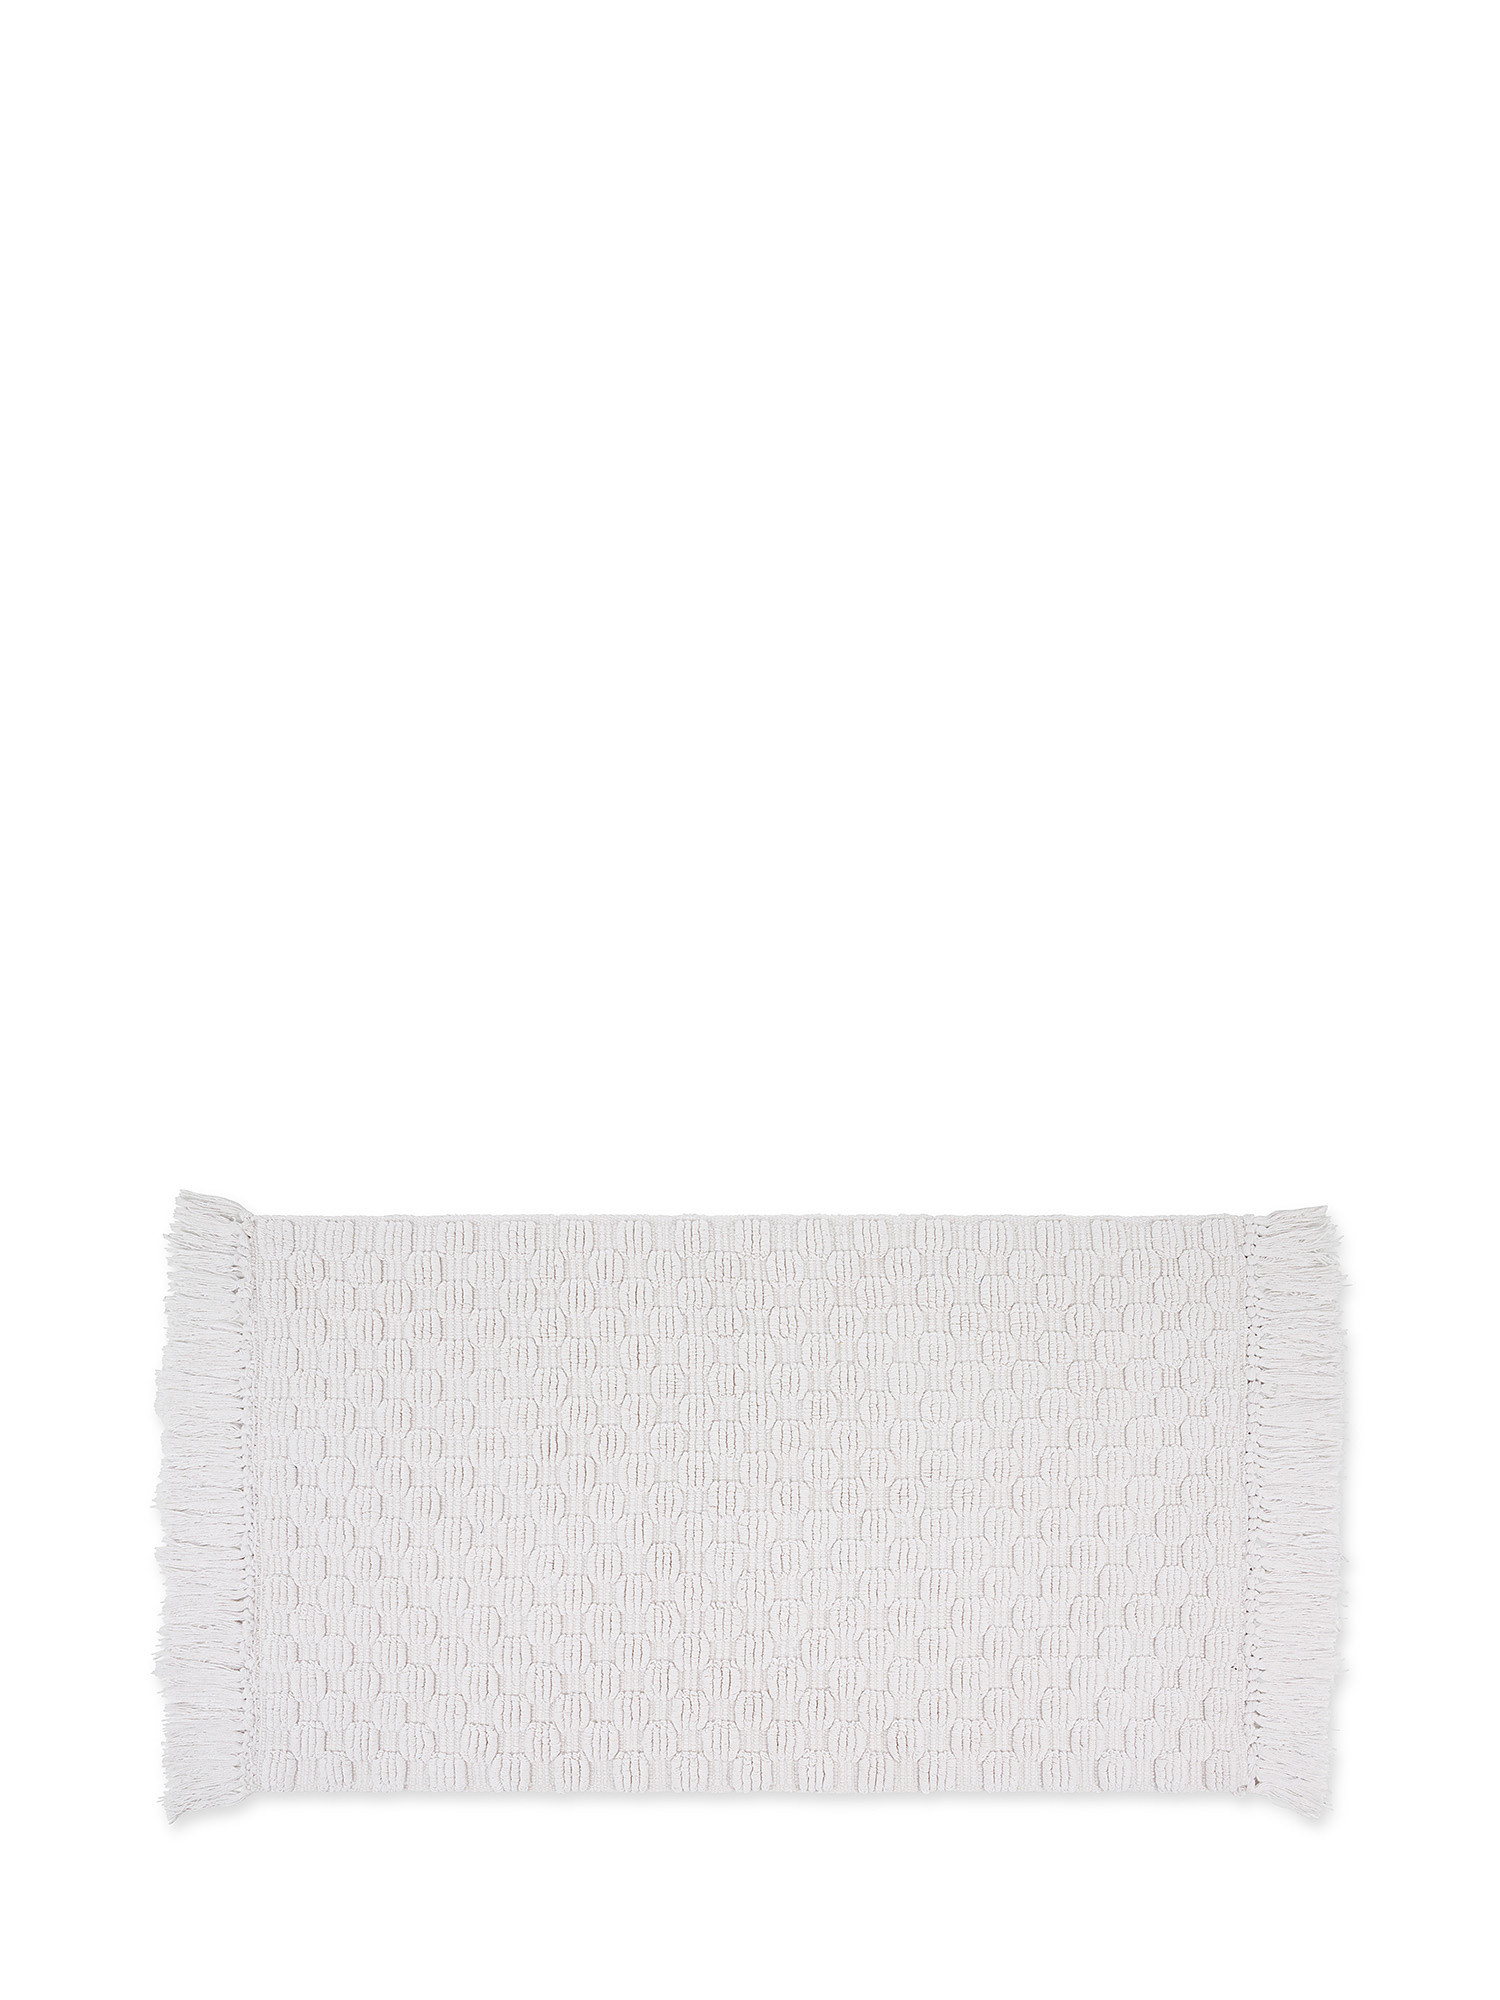 Bath mat in jacquard fabric with relief motif, White, large image number 0